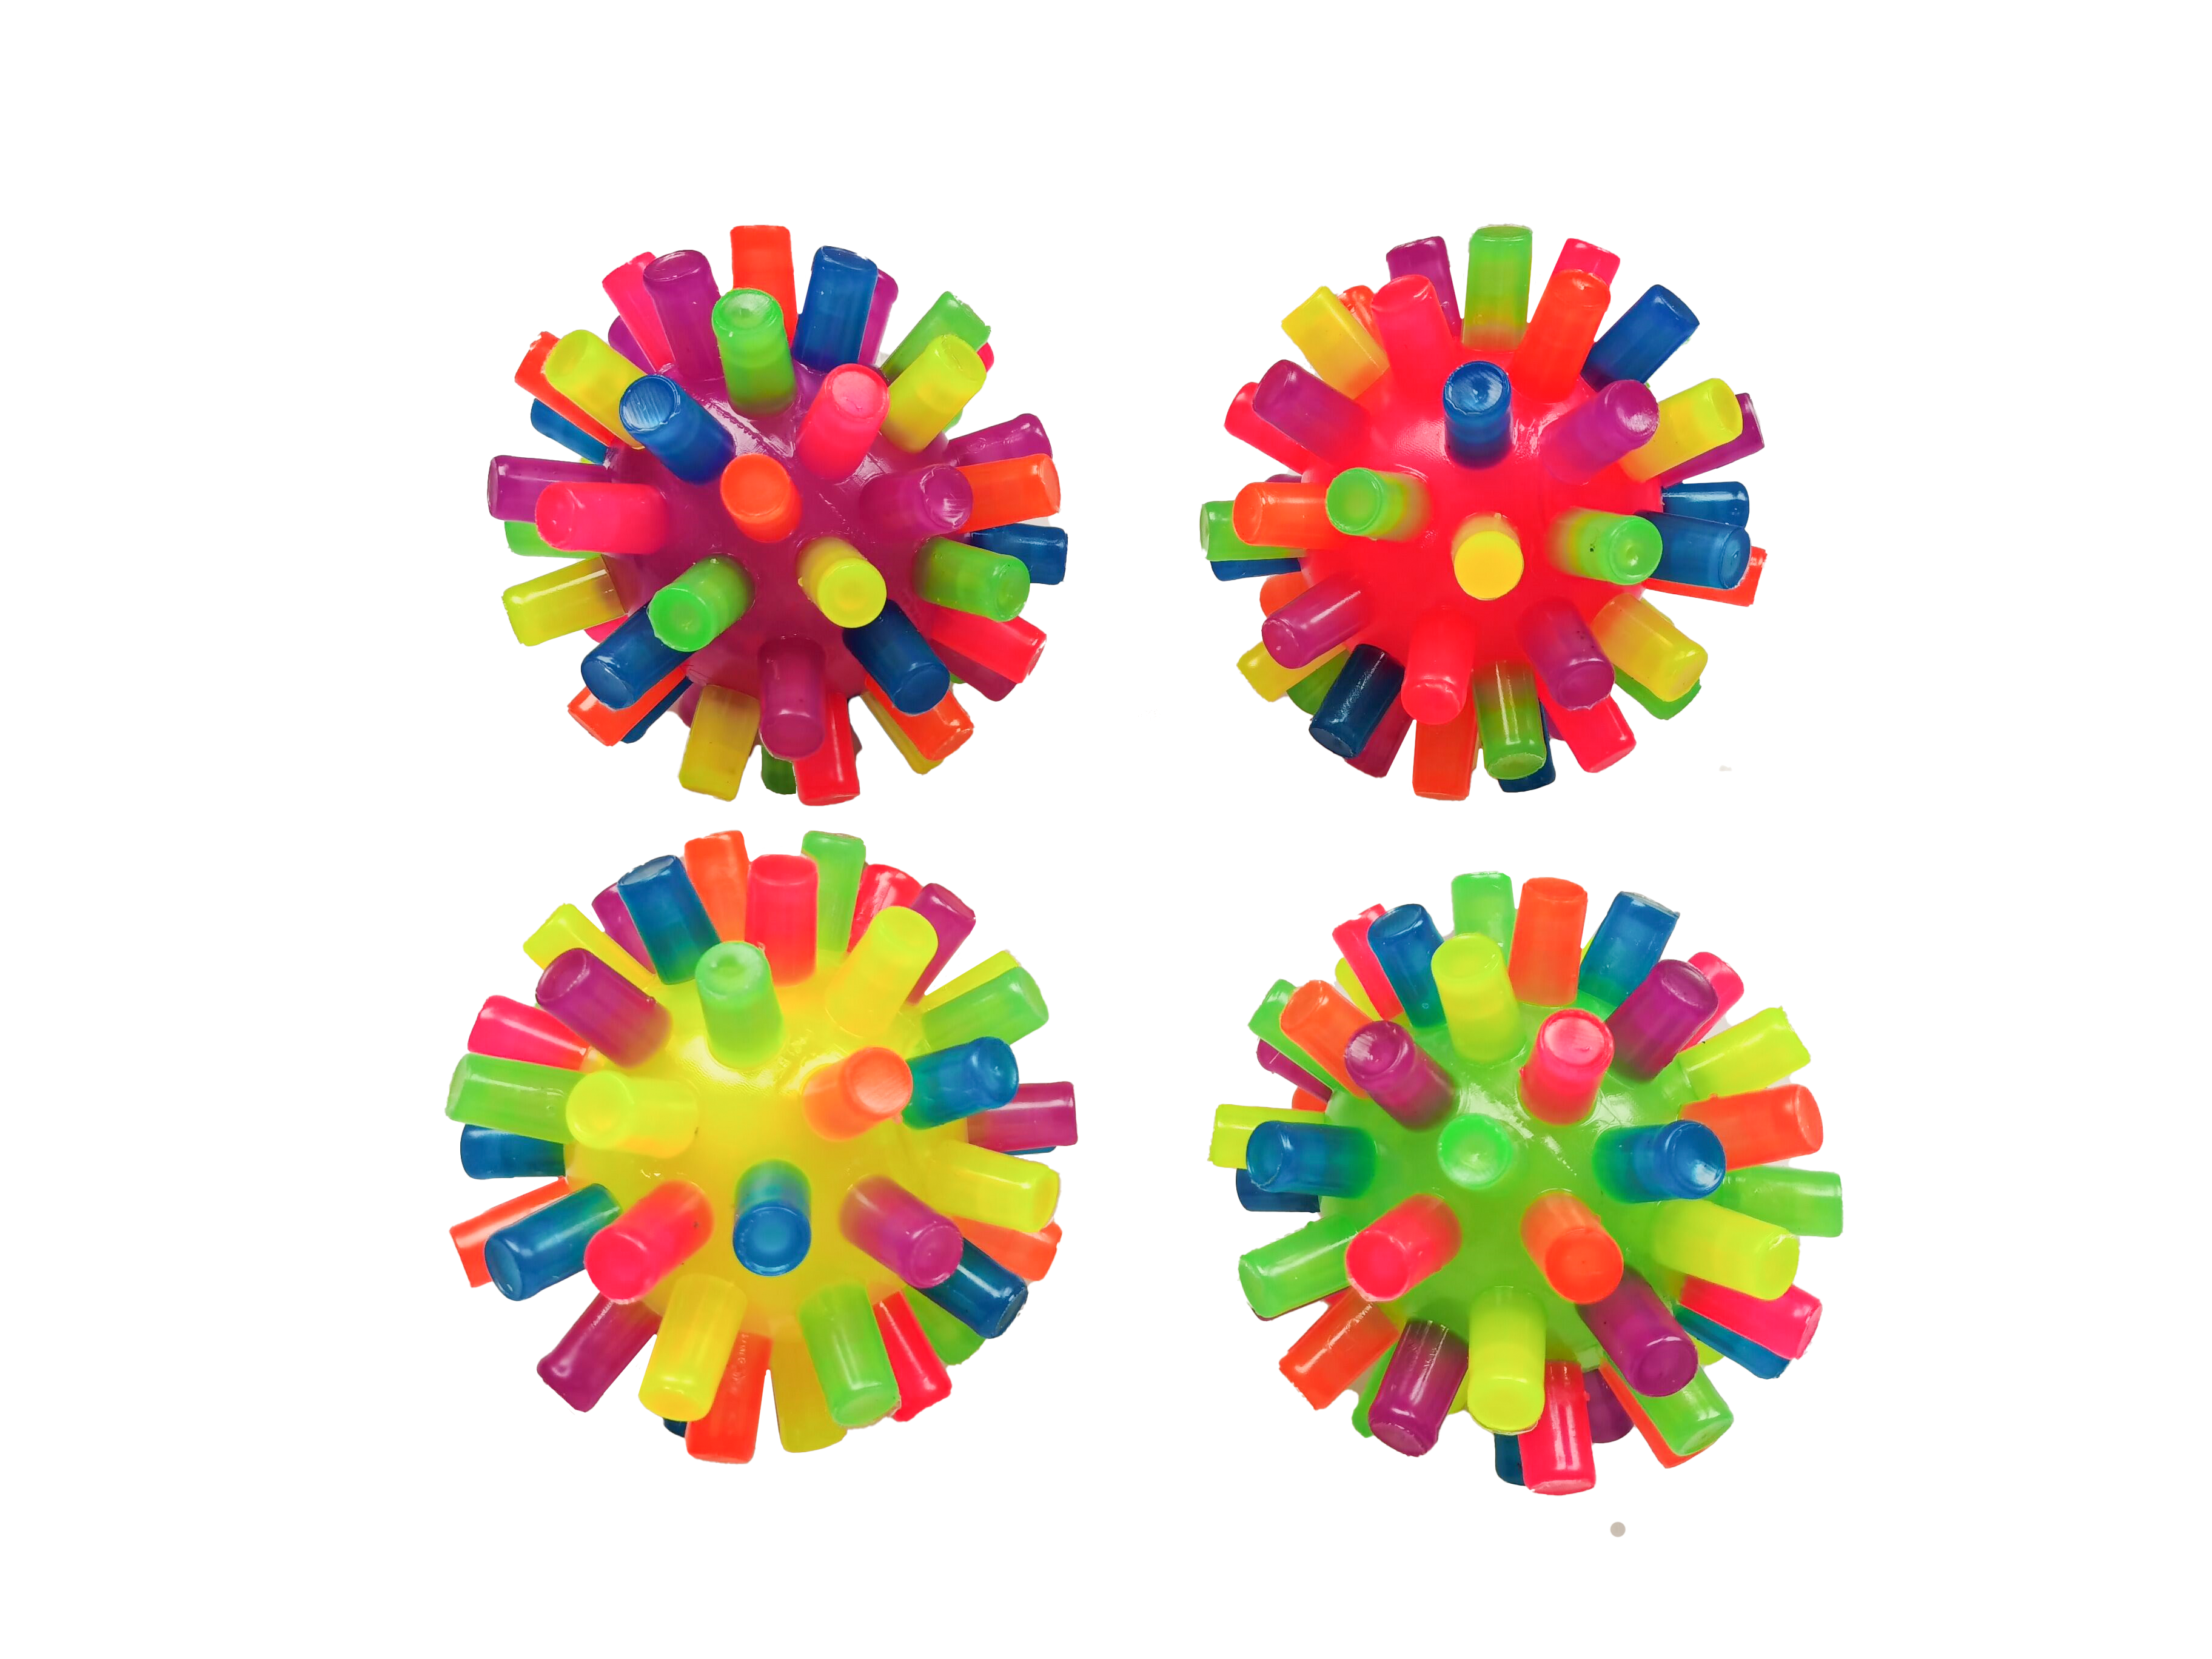 High quality fidget multi color spiky ball toy